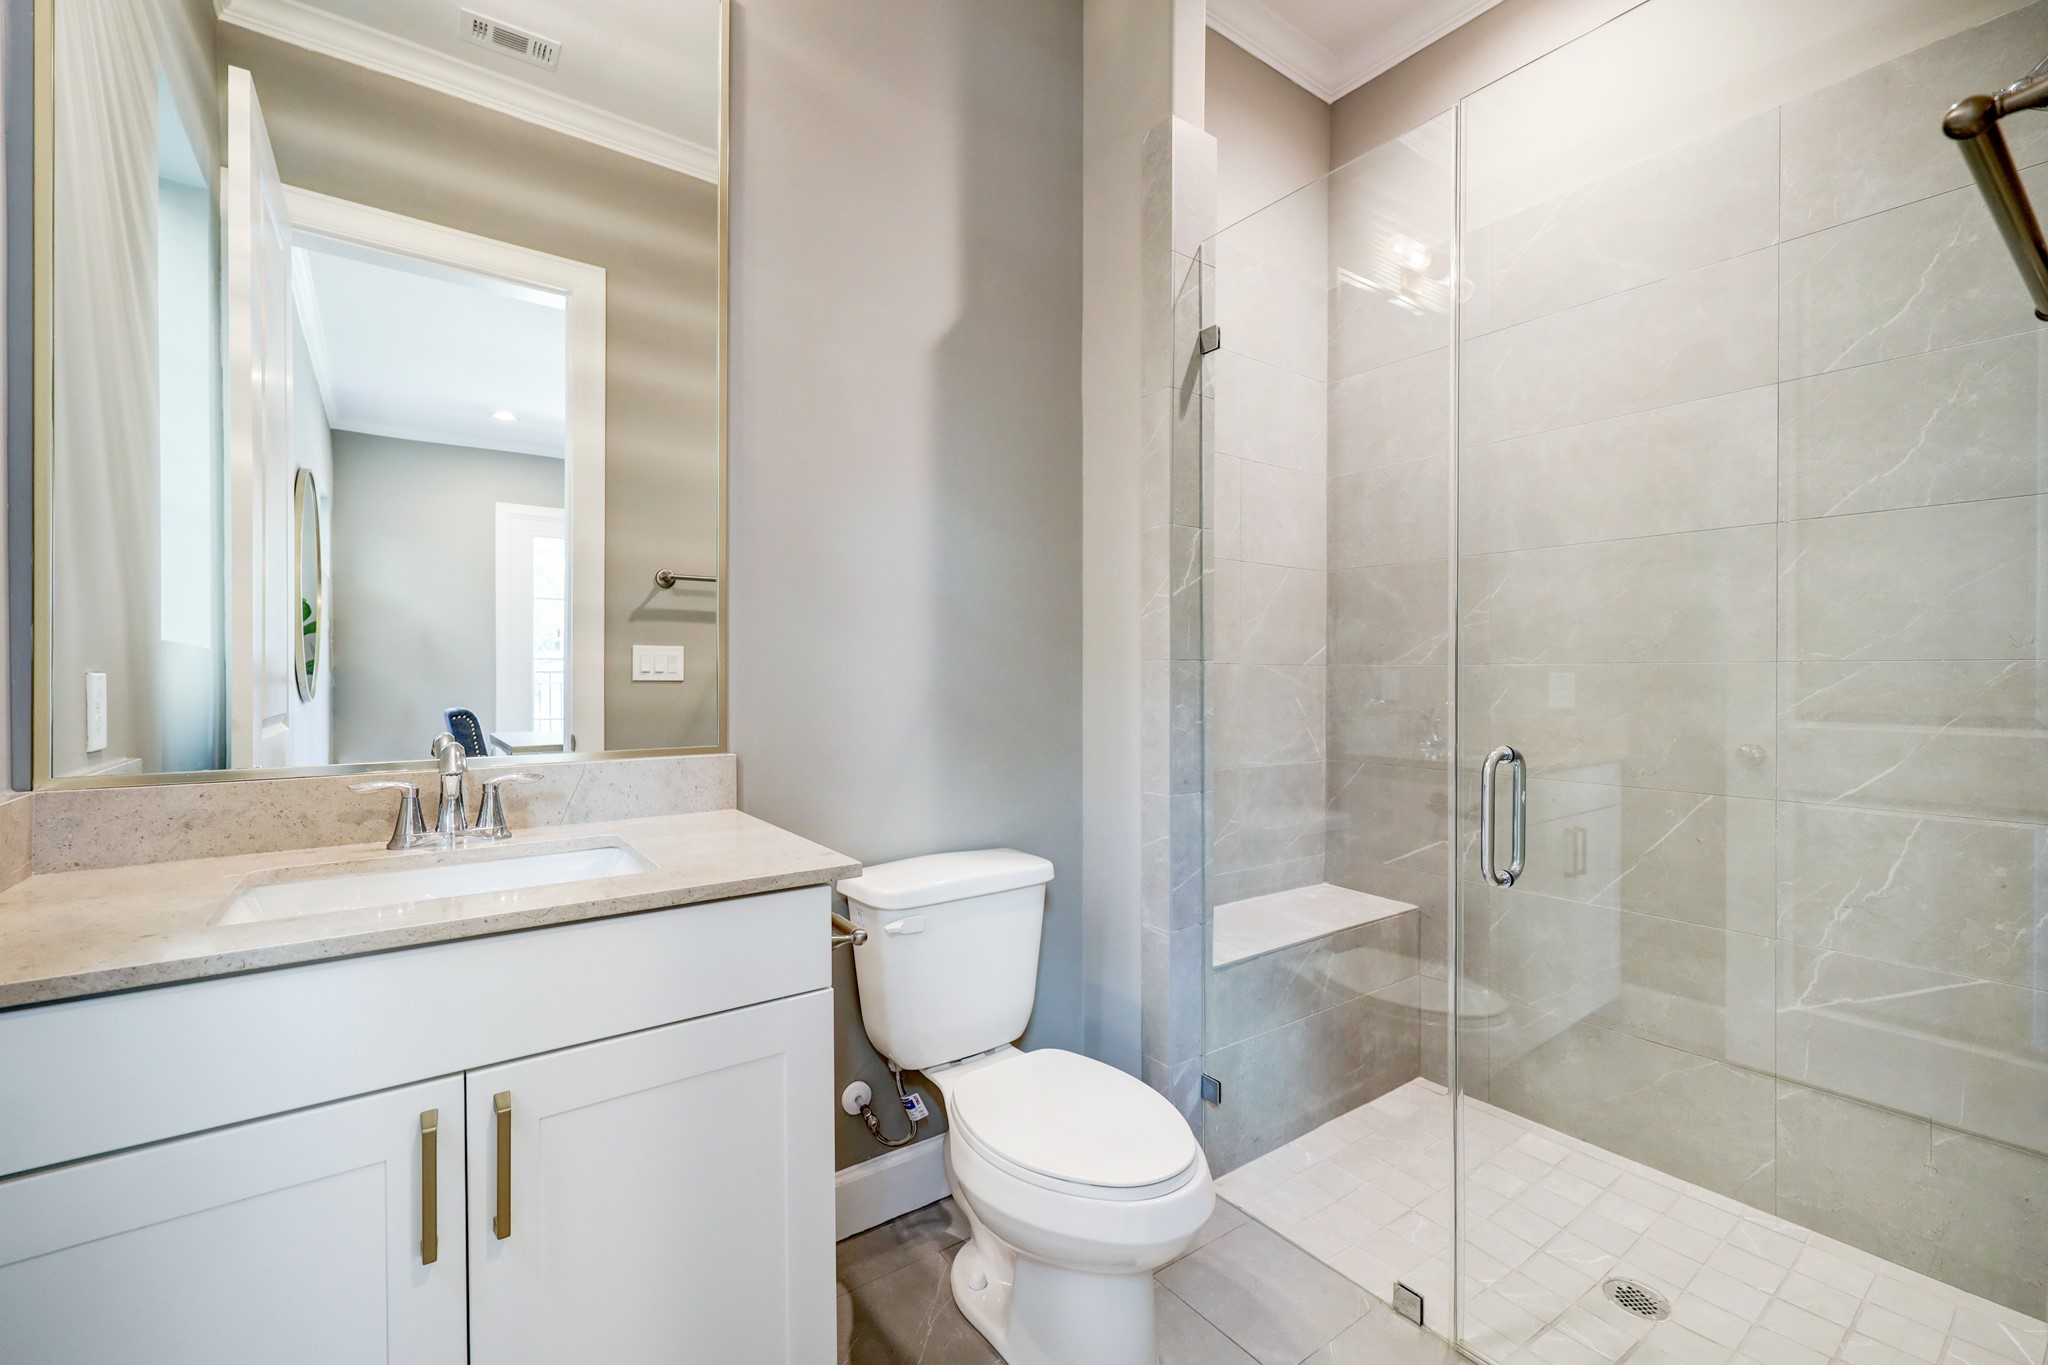 Full bath with walk-in shower on the first
floor.